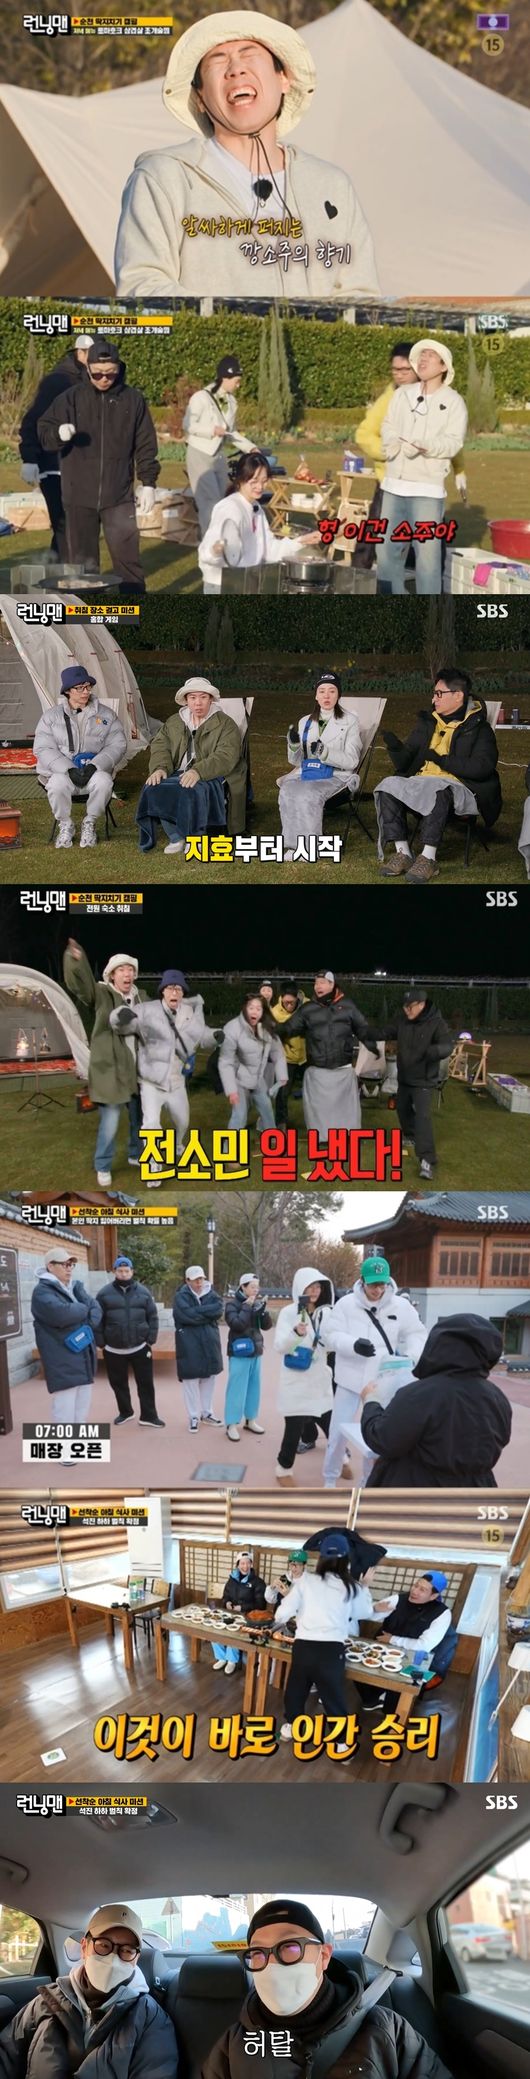  ⁇  Running Man ⁇  gave a big laugh with another legend episode.The SBS  ⁇  Running Man  ⁇ , which was broadcast on the 2nd, was decorated with the  ⁇  Suncheon Slap-match Camping  ⁇  Race after last week, and it has risen to the highest audience rating of 6% per minute (Nielsen Korea metropolitan area, furniture standard)The members who made the full-scale camping were a series of  ⁇   ⁇   ⁇   ⁇   ⁇   ⁇   ⁇   ⁇ .In the evening, Jeon So-min, who was making a steamed shellfish, made everyone amazed by his ability to cook more than a shellfish.Yang Se-chan revealed that he had put a bottle of shochu, saying that he should not drive if he had to drive, and Yoo Jae-Suk laughed at his mouth.Afterwards, the members took a place to go to bed and challenged  ⁇   ⁇   ⁇   ⁇   ⁇   ⁇   ⁇   ⁇   ⁇   ⁇   ⁇   ⁇   ⁇   ⁇   ⁇   ⁇   ⁇   ⁇ .However, Yoo Jae-Suks Game has become a mess, and the game has become a mess, and the panty game that followed has also attracted attention as it continued to be embarrassing.As a result of the game, the first place was Yang Se-chan and the last place was Yoo Jae-Suk. In the last slap-match, Jeon So-min made a big success and eventually everyone was confirmed to sleep indoors.On the other hand, the next day, the Road Race, which can be eaten for breakfast, was held. Yoo Jae-Suk, who started hiding all the shoes of the members from the beginning, arrived at the final destination with only the slightest hint suggested by the production team.The second was Yang Se-chan, Kim Jong-guk, Song Ji-hyo and Jeon So-min.On the other hand, Ji Suk-jin and Haha were late to catch up with the taxi chase, and this scene soared to the highest audience rating of 6% per minute and took the best one minute.The final result Ji Suk-jin and Haha failed to get breakfast without reaching the restaurant, and proceeded to pick strawberries at the strawberry farm as a penalty.